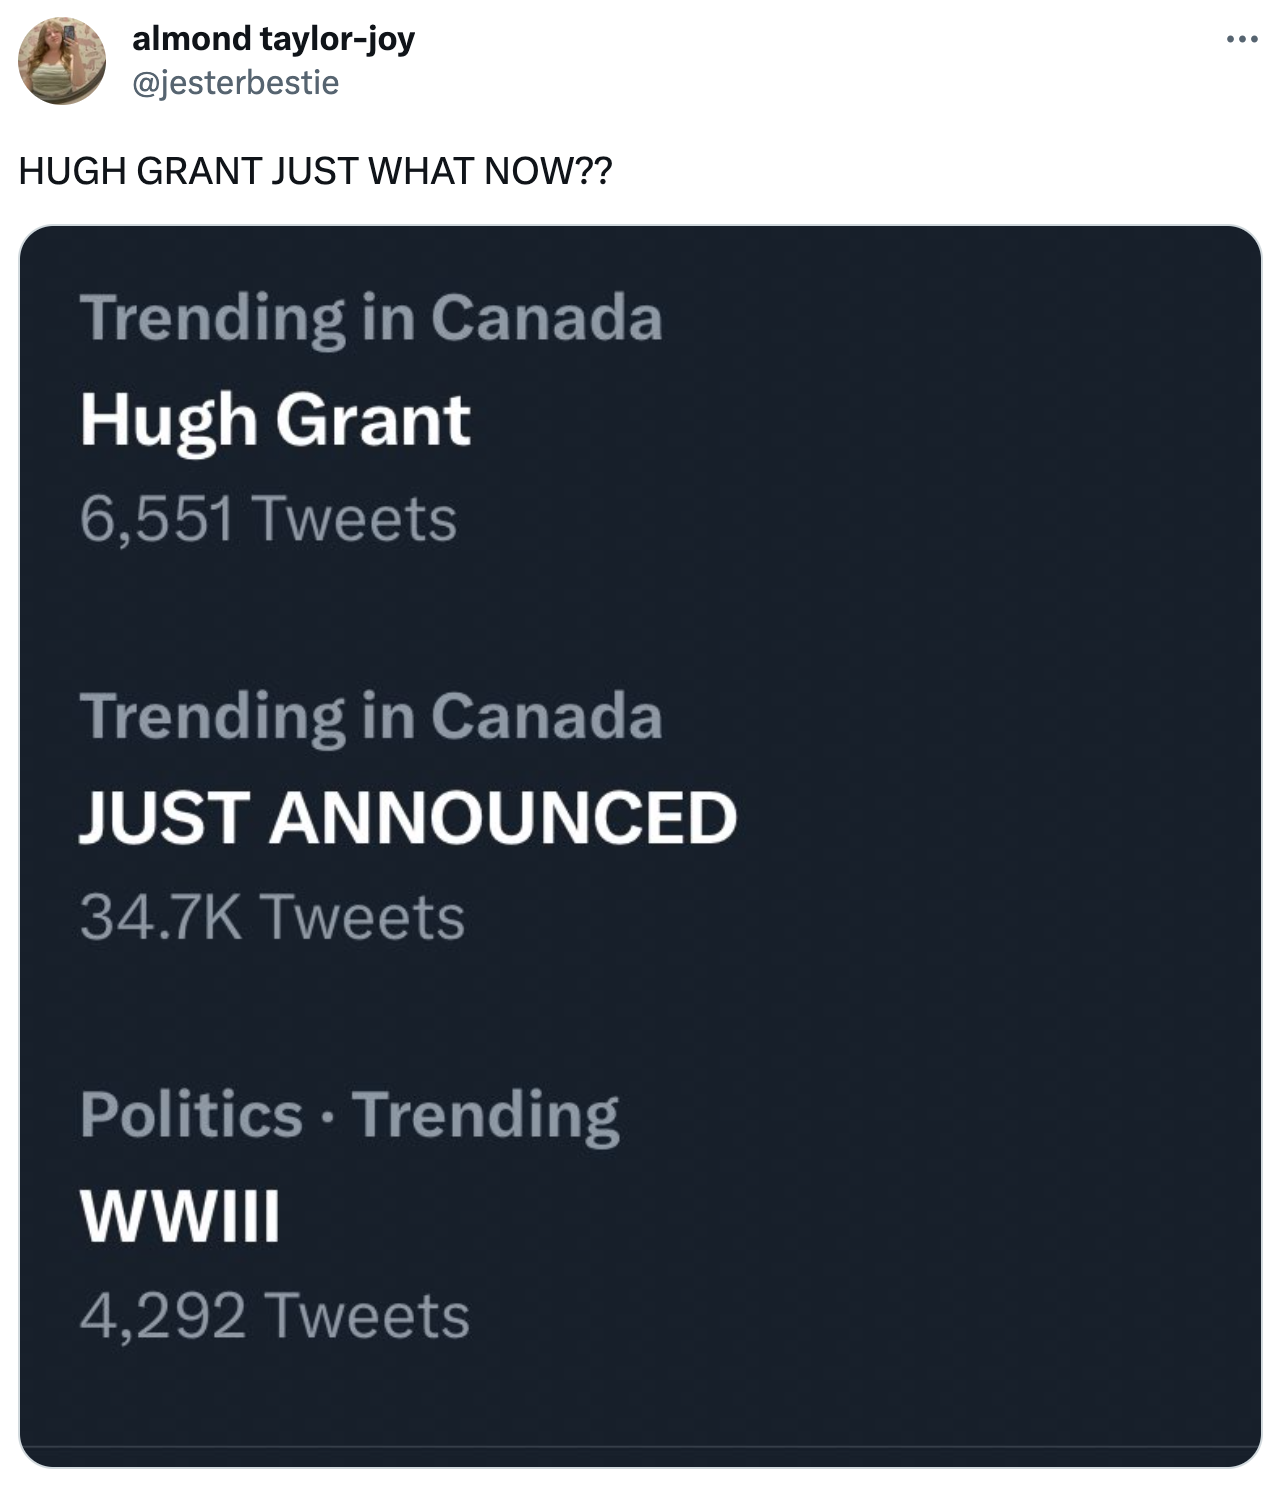 twitter highlights funny tweets  - almond taylorjoy Hugh Grant Just What Now?? Trending in Canada Hugh Grant 6,551 Tweets Trending in Canada Just Announced Tweets Politics Trending Wwiii 4,292 Tweets